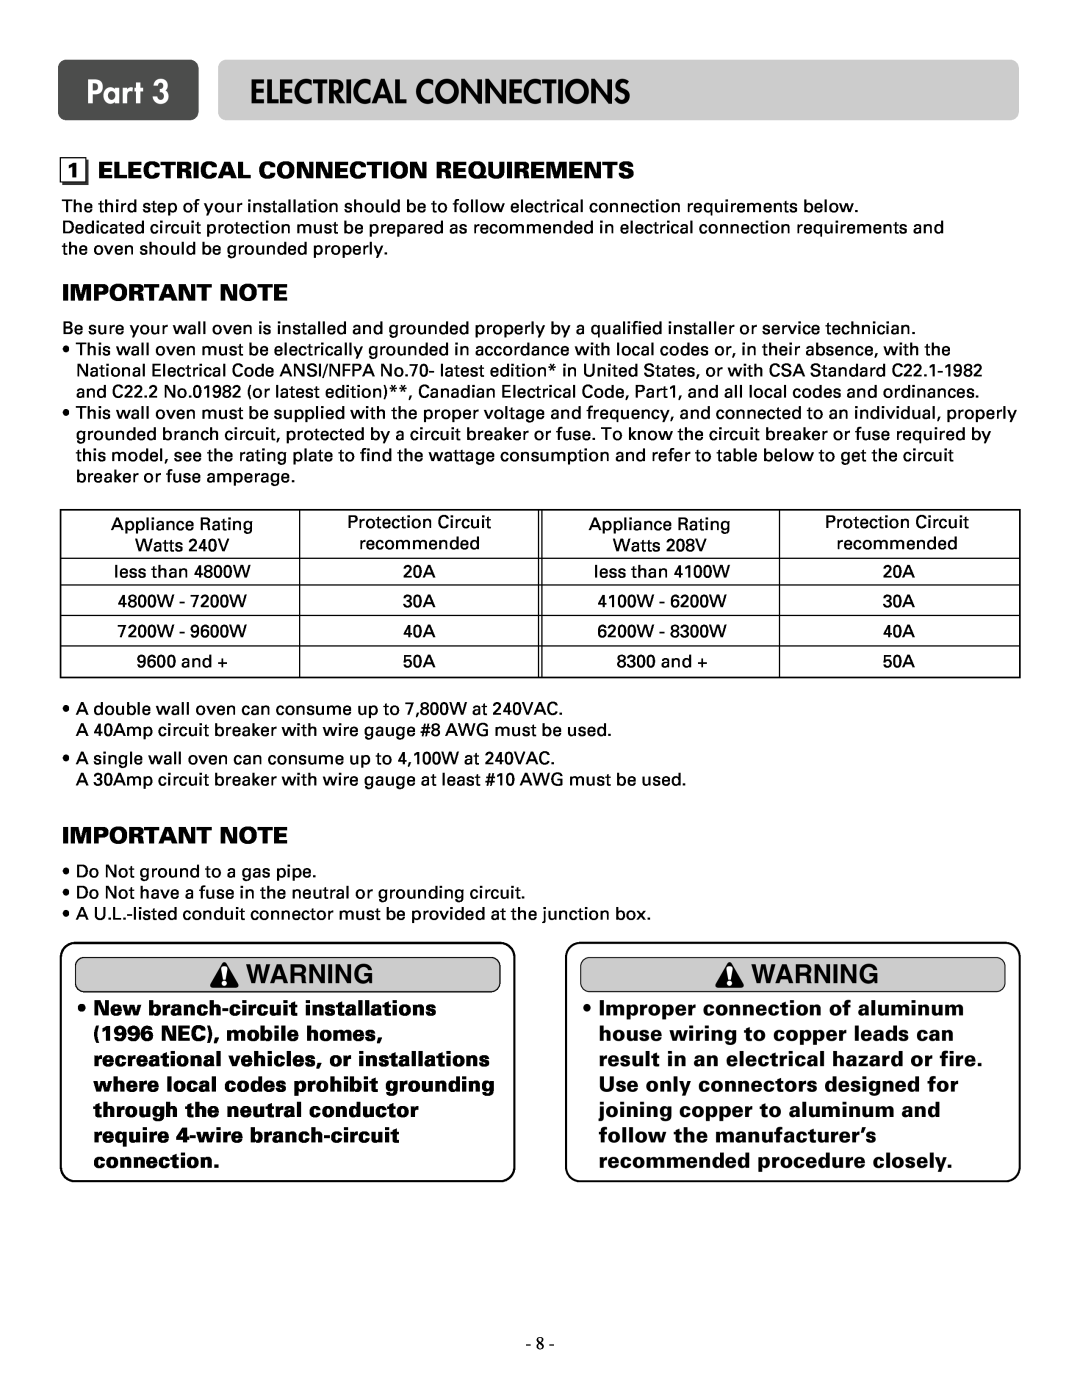 LG Electronics LWS3081ST, LWD3081ST Part 3 ELECTRICAL CONNECTIONS, Electrical Connection Requirements, Important Note 